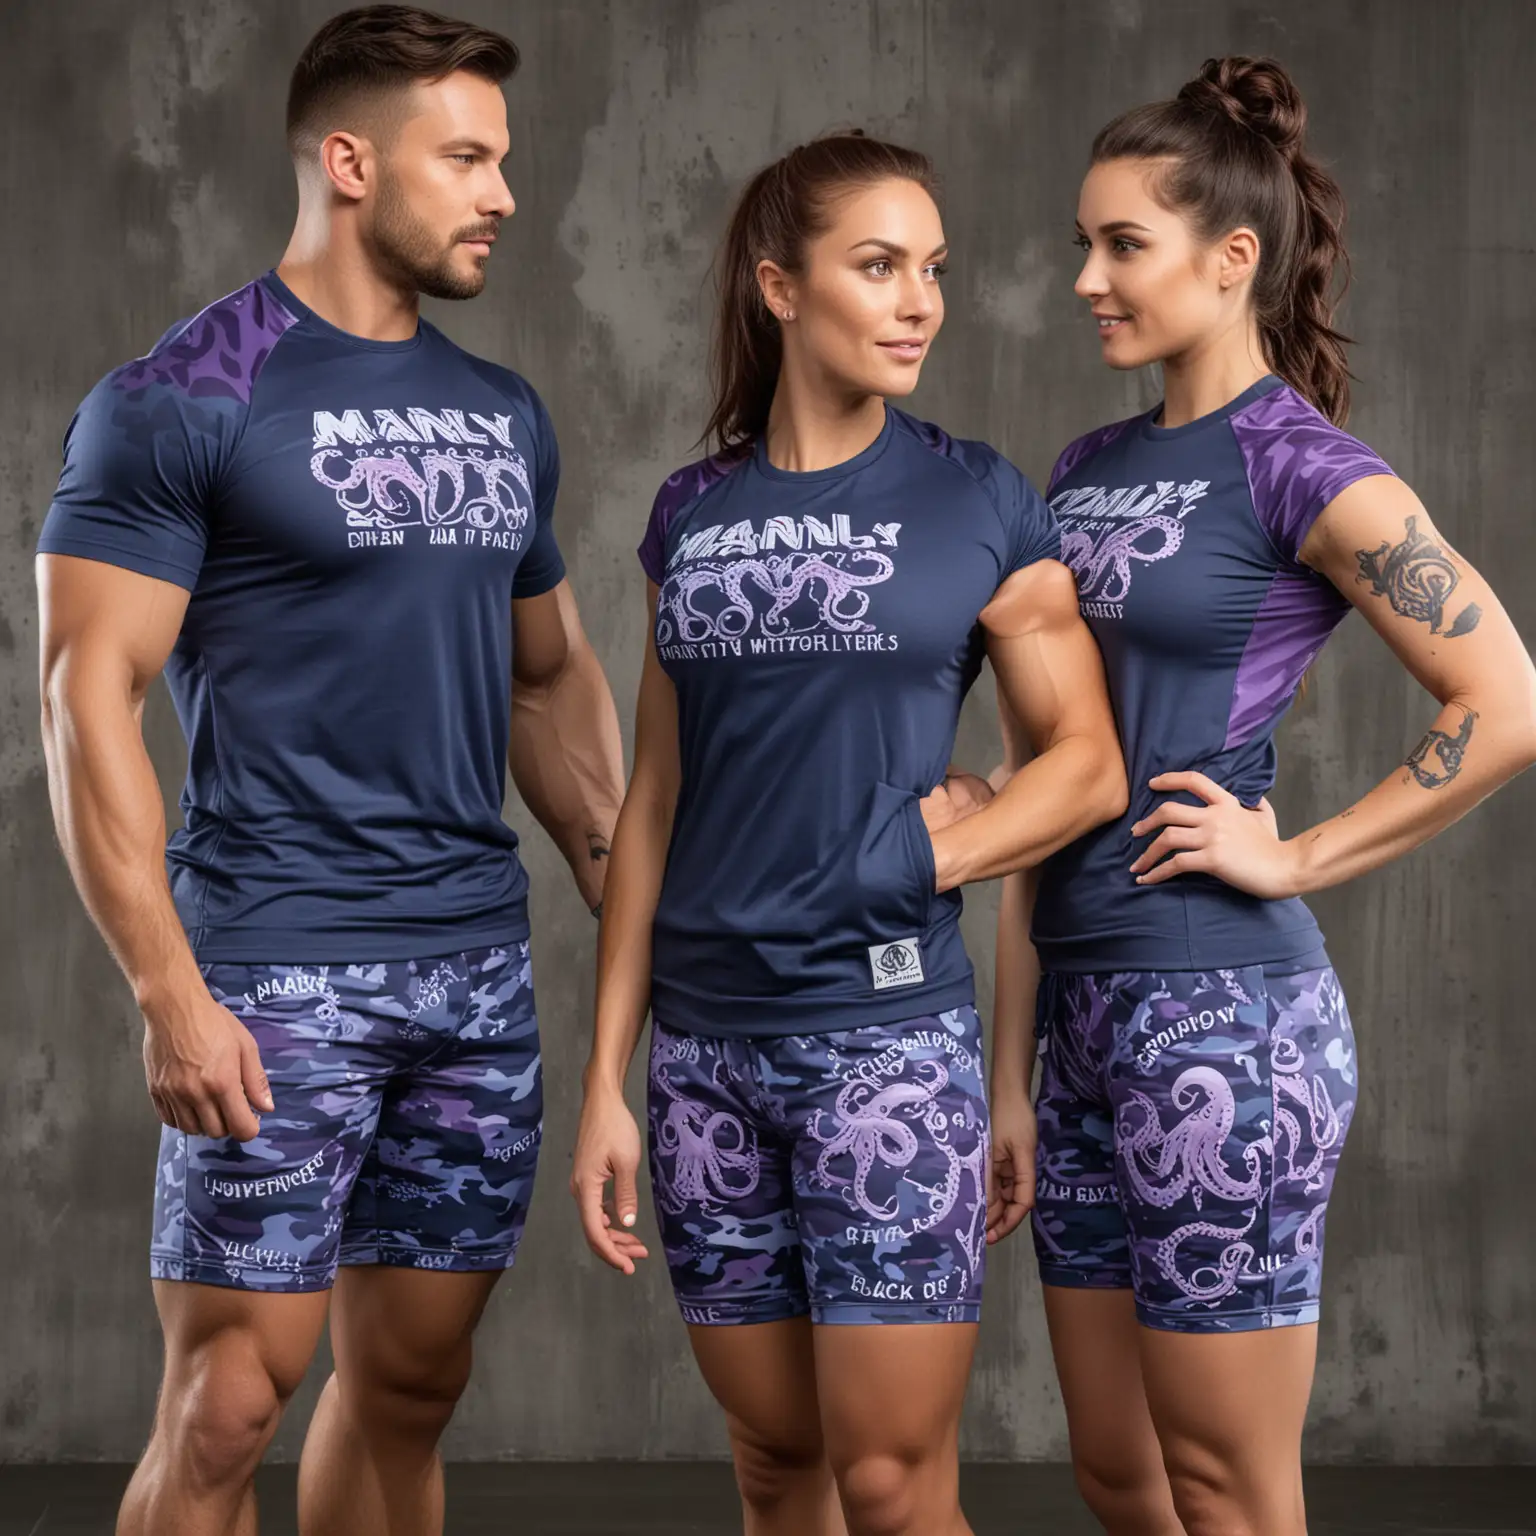 Octopus Logo Gym Workout Shirts and Shorts for Male and Female Bodybuilders